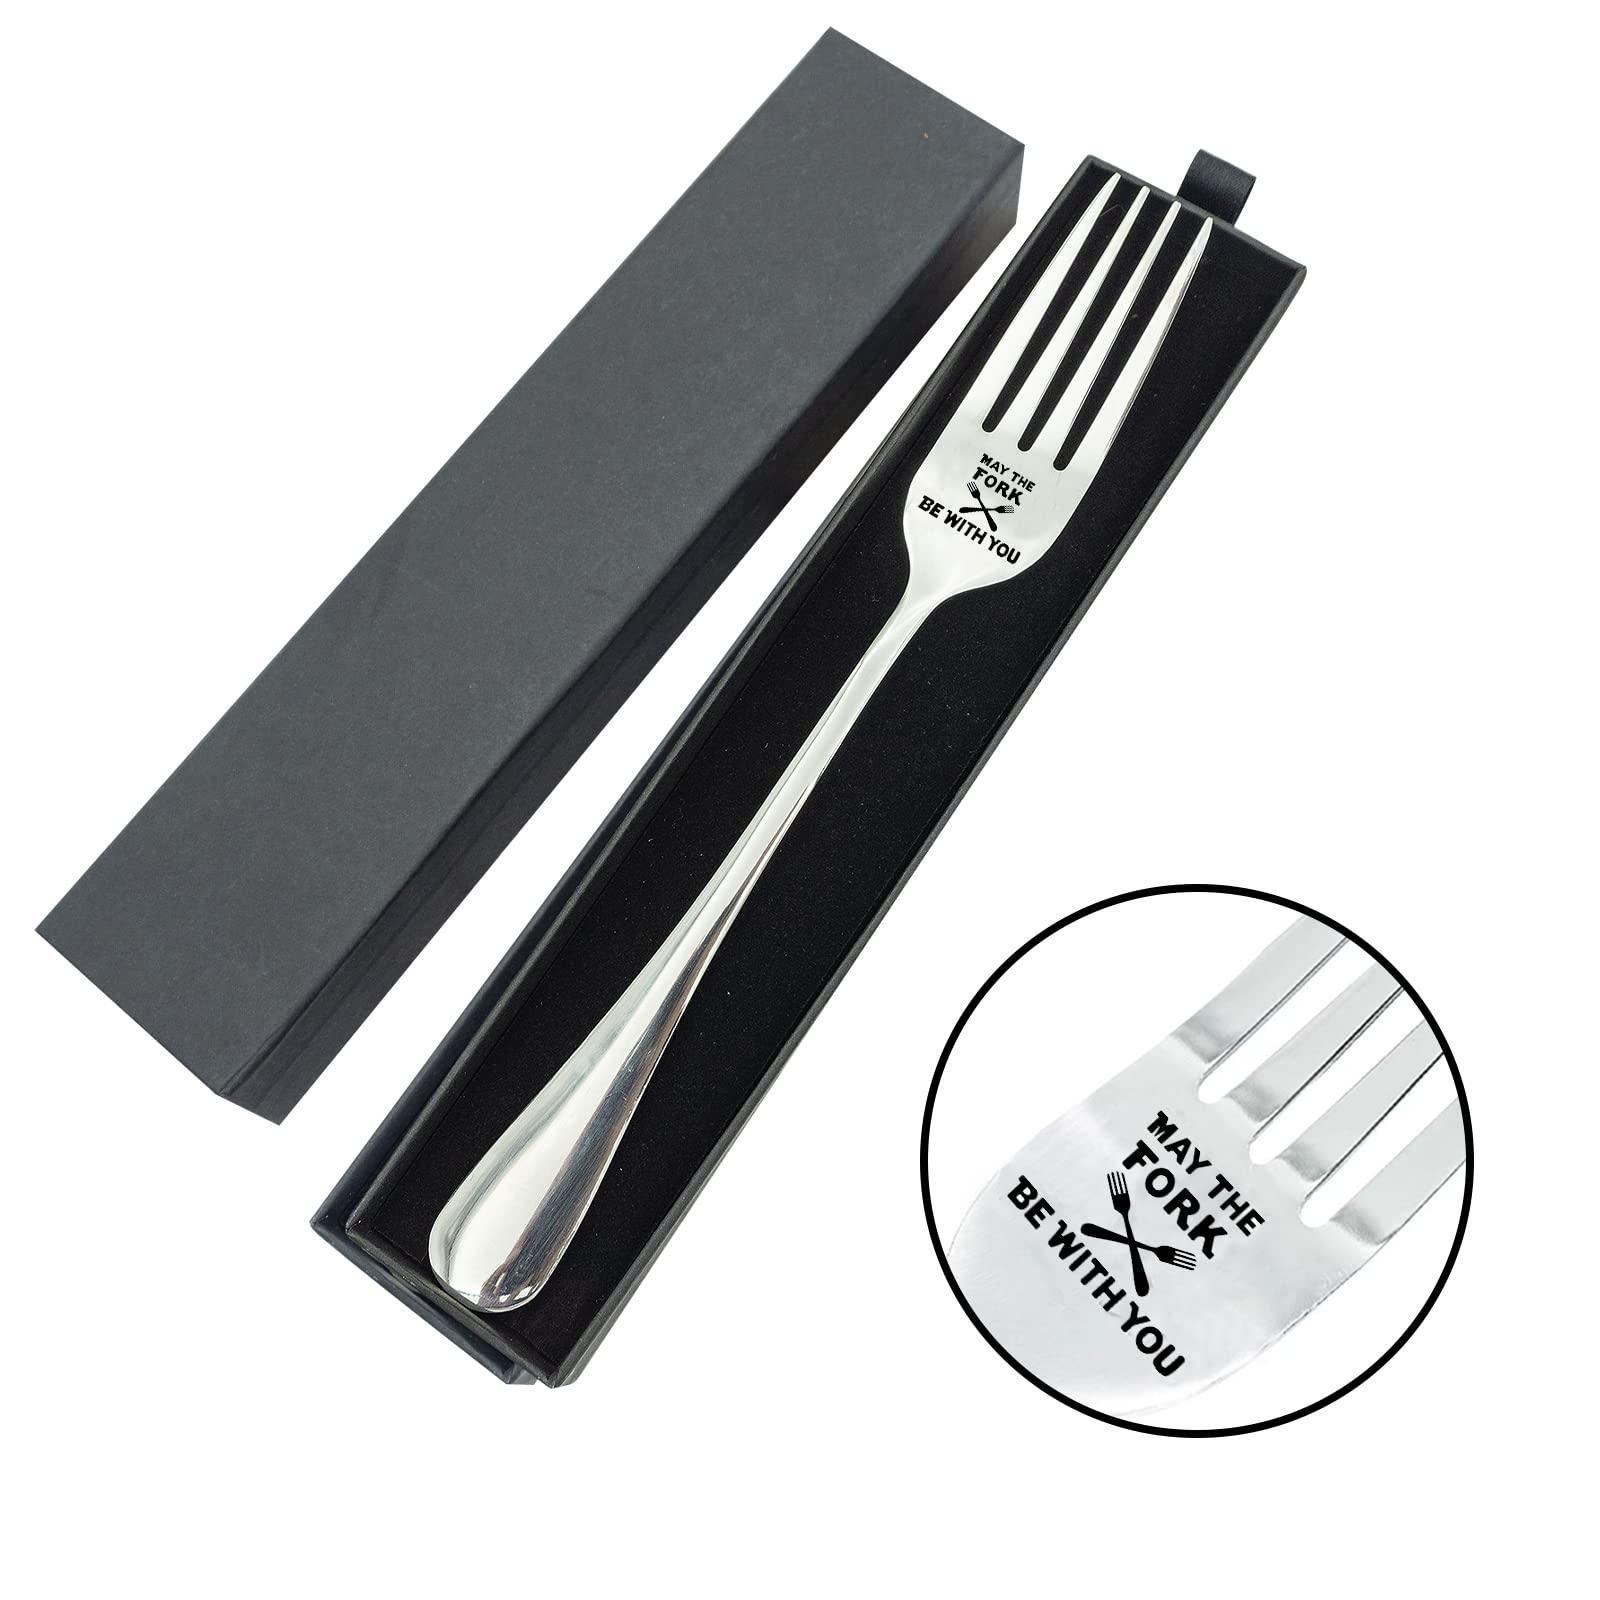 vickhu may the fork be with you fork,starwars gifts,gifts for boyfriend girlfriend husband mom dad, anniversary christmas val